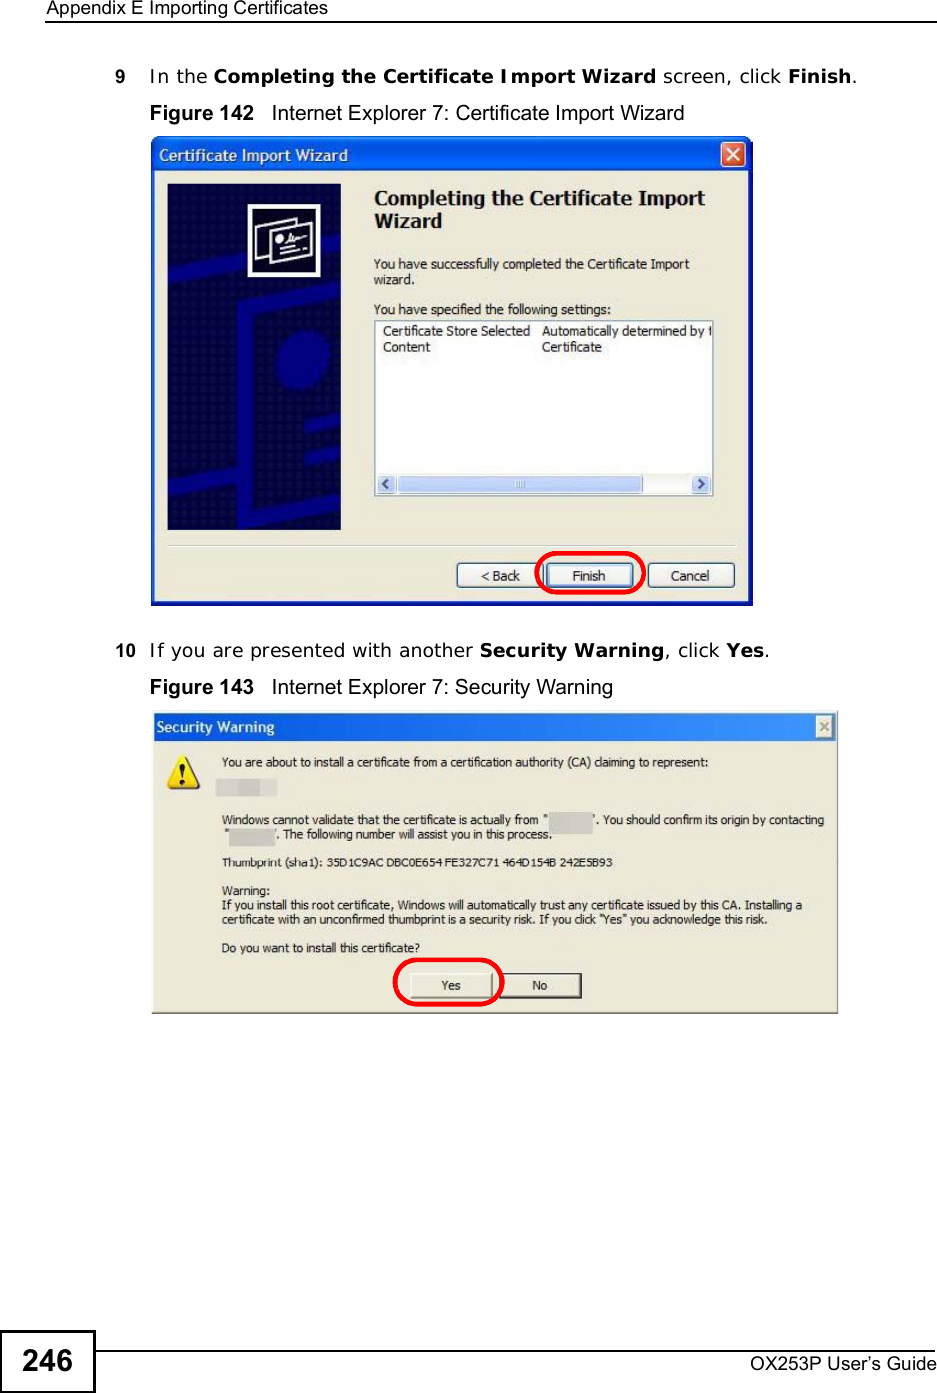 Appendix EImporting CertificatesOX253P User’s Guide2469In the Completing the Certificate Import Wizard screen, click Finish.Figure 142   Internet Explorer 7: Certificate Import Wizard10 If you are presented with another Security Warning, click Yes.Figure 143   Internet Explorer 7: Security Warning